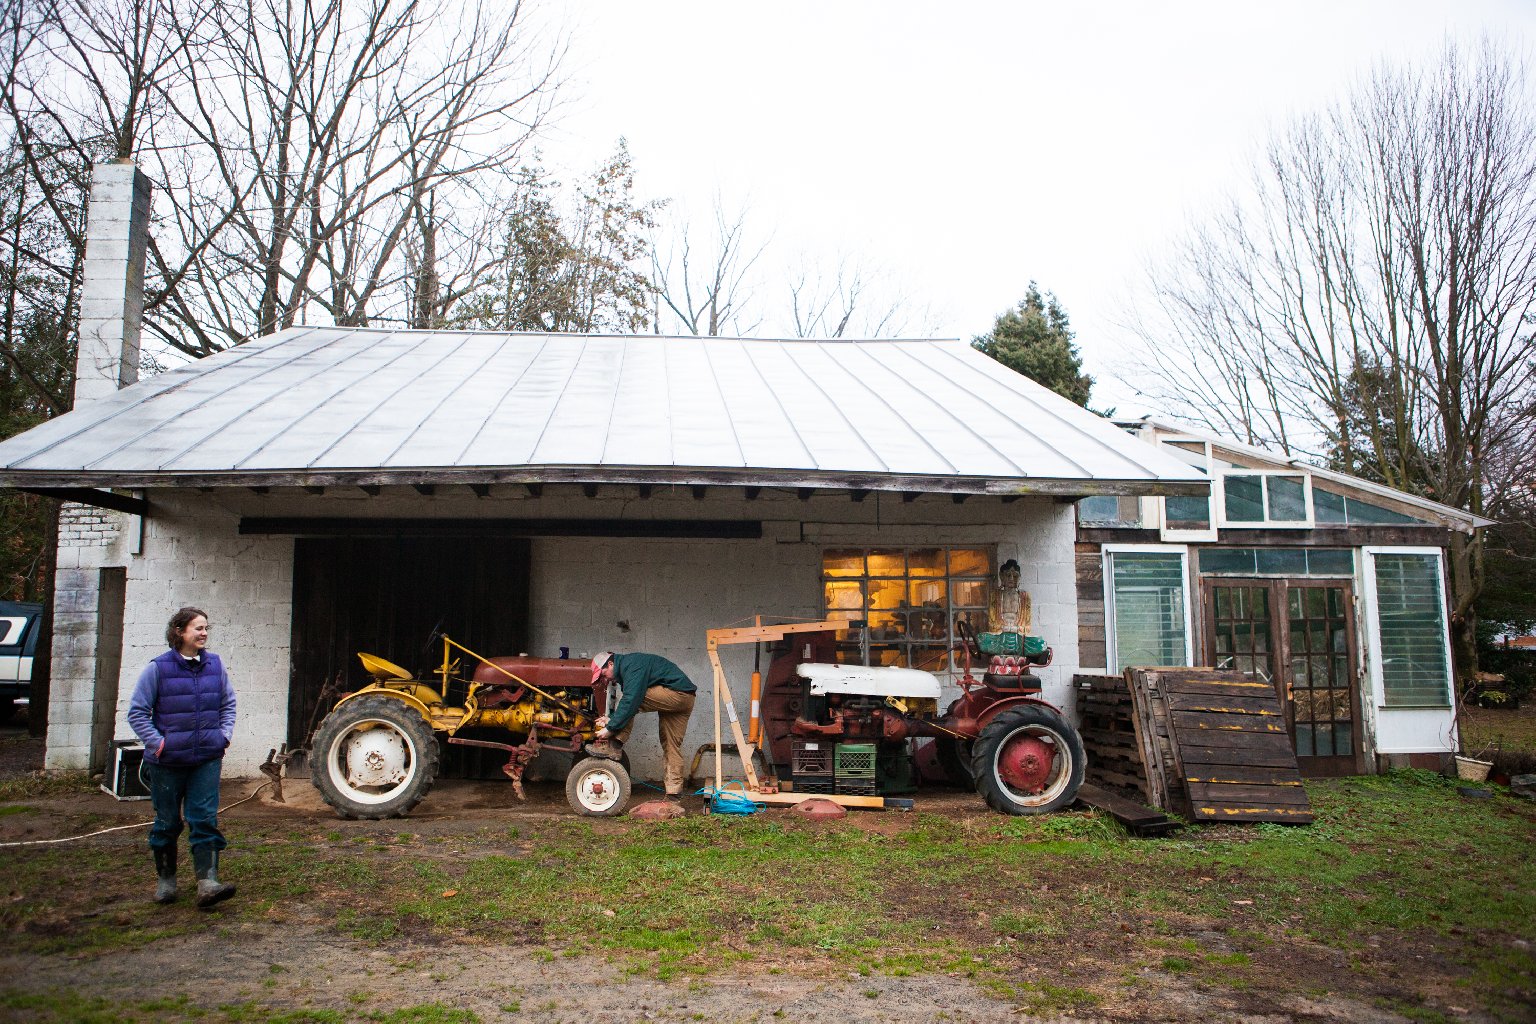 Chris and Sara Guerre are among a growing number of farmers who have made the choice to rent land to farm instead of buy because of increasing property values. Photo: Zac Visco for NPR